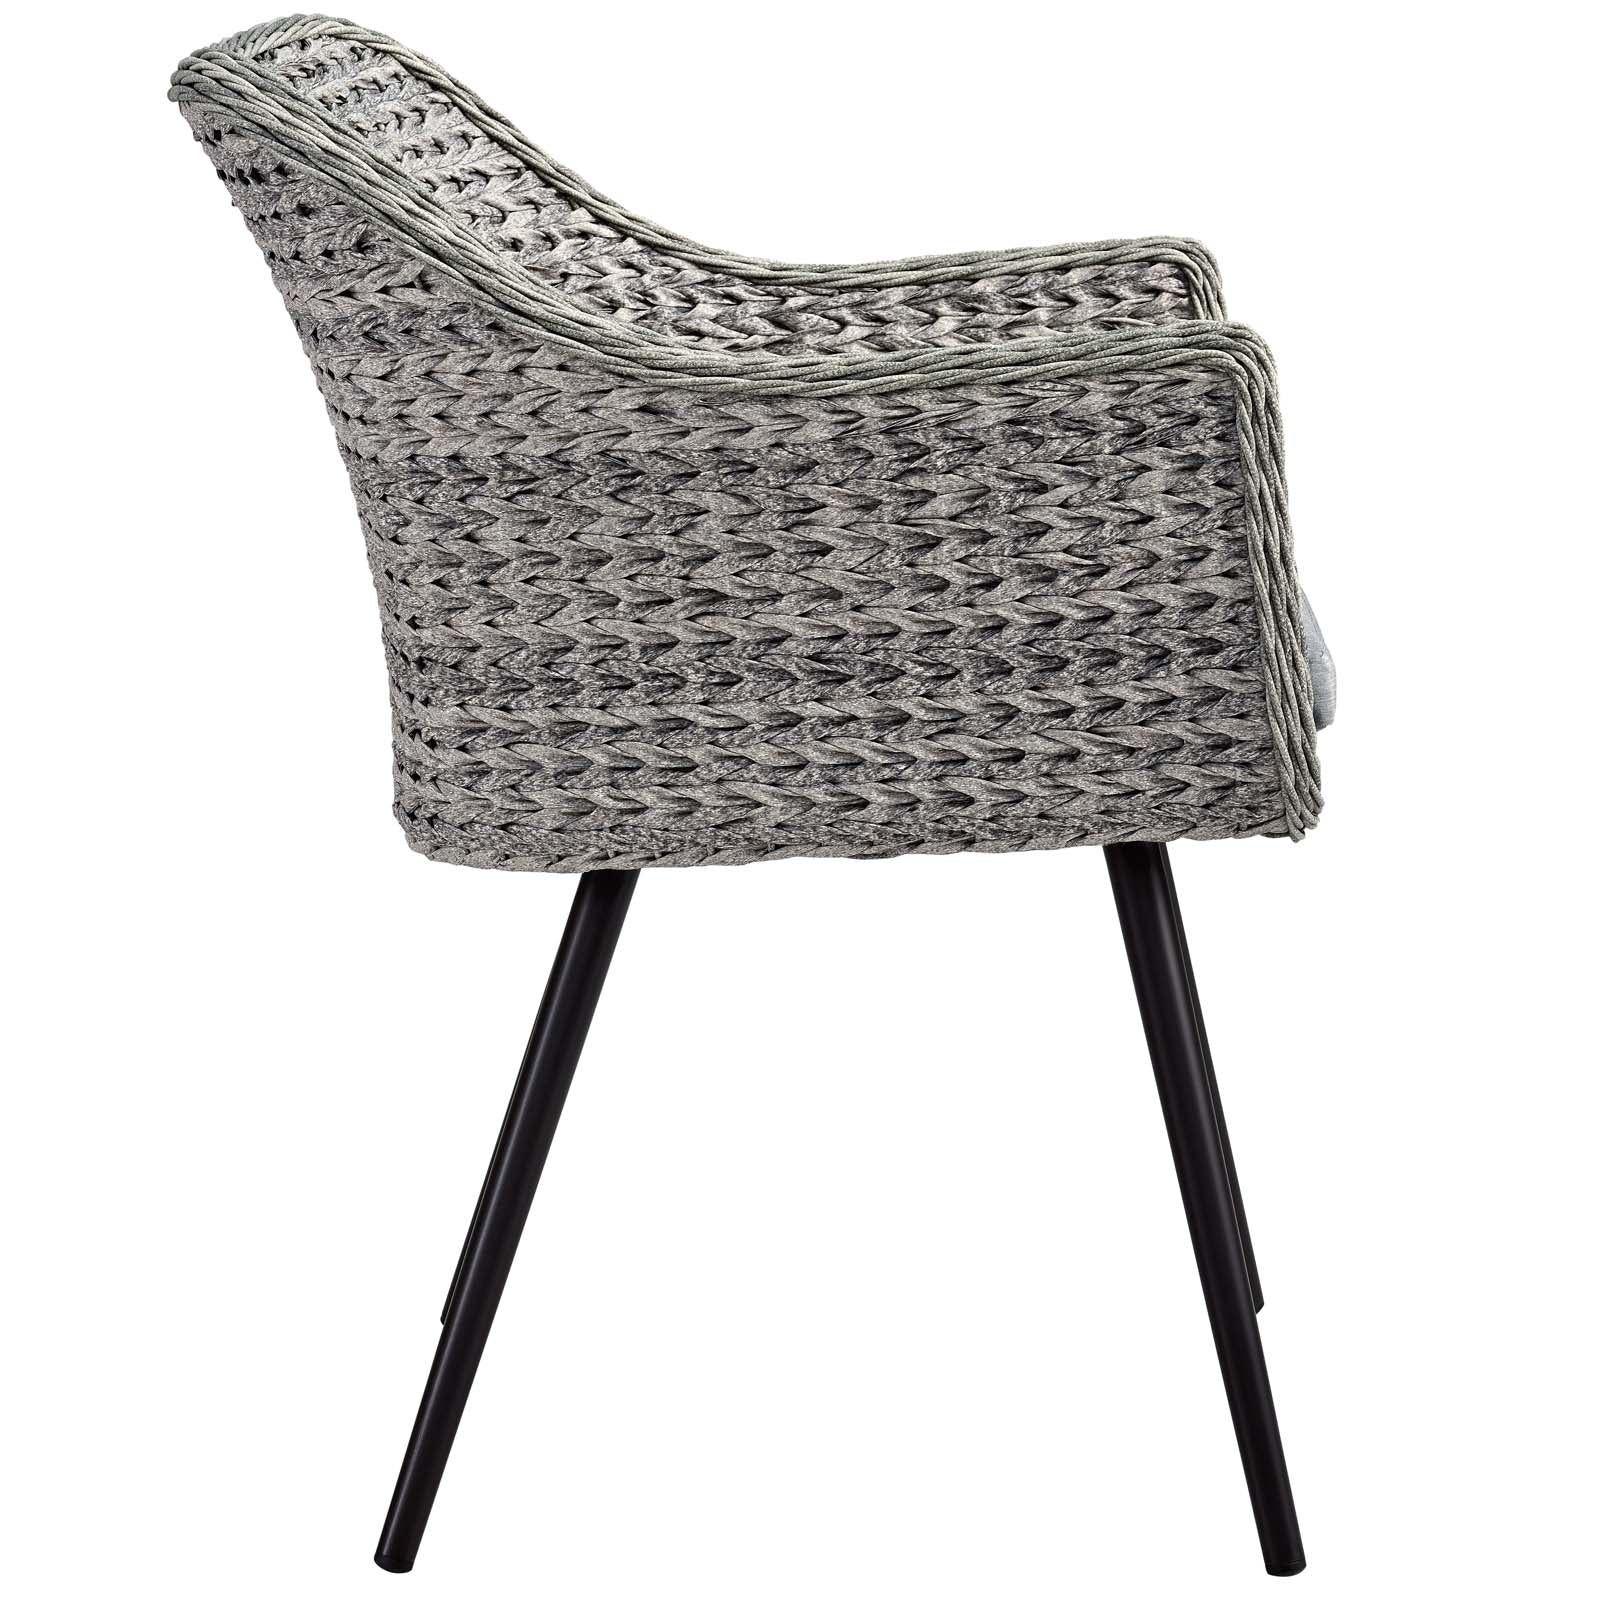 Endeavor Outdoor Patio Wicker Rattan Dining Armchair-Outdoor Dining Chair-Modway-Wall2Wall Furnishings